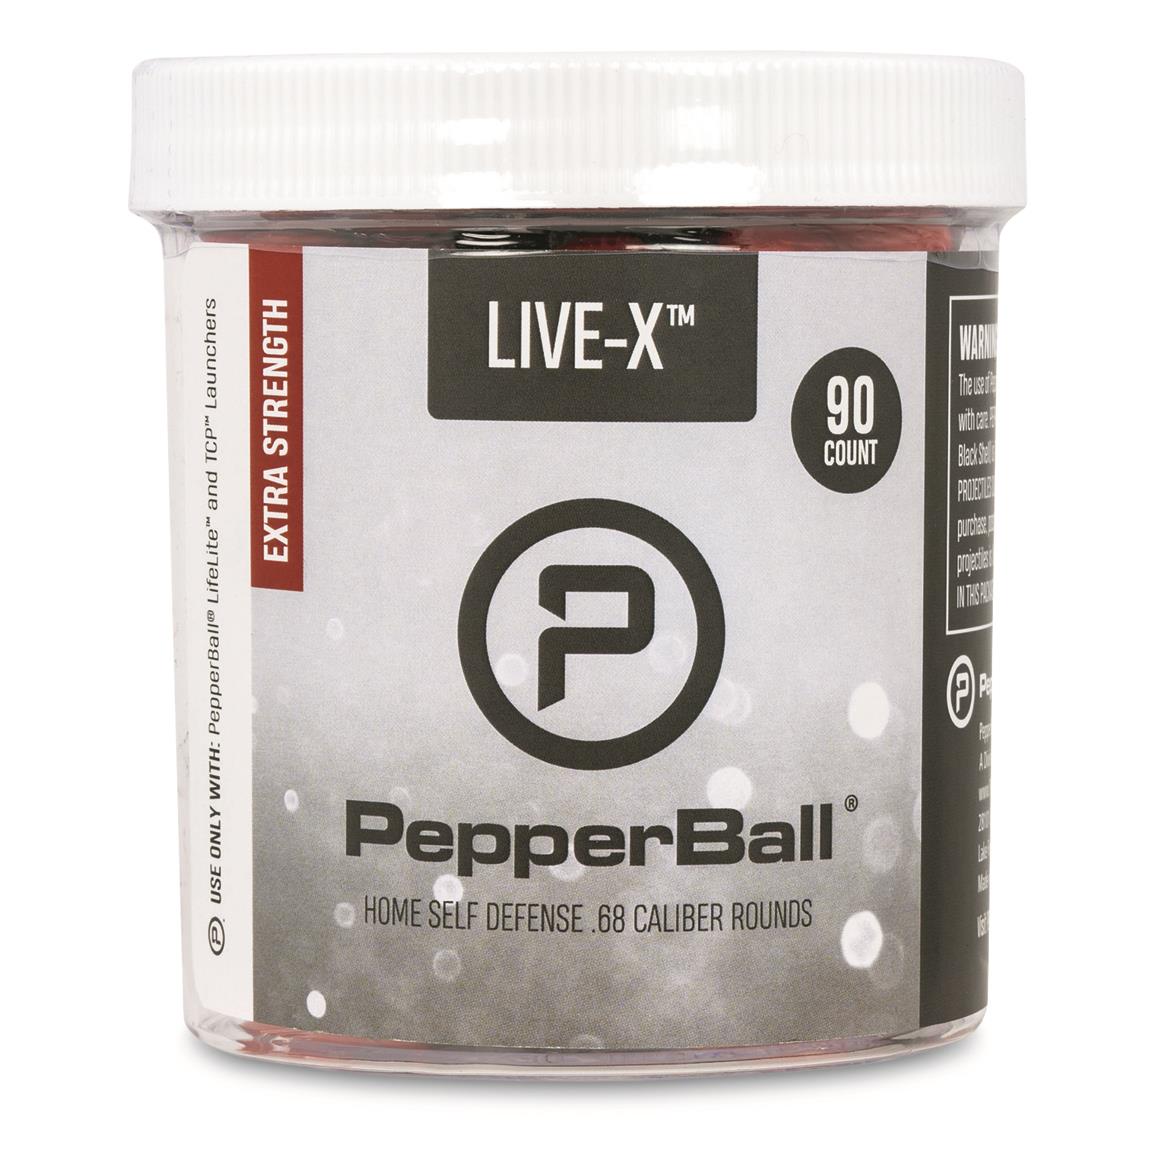 PepperBall LIve-X Projectiles, 90 Pack